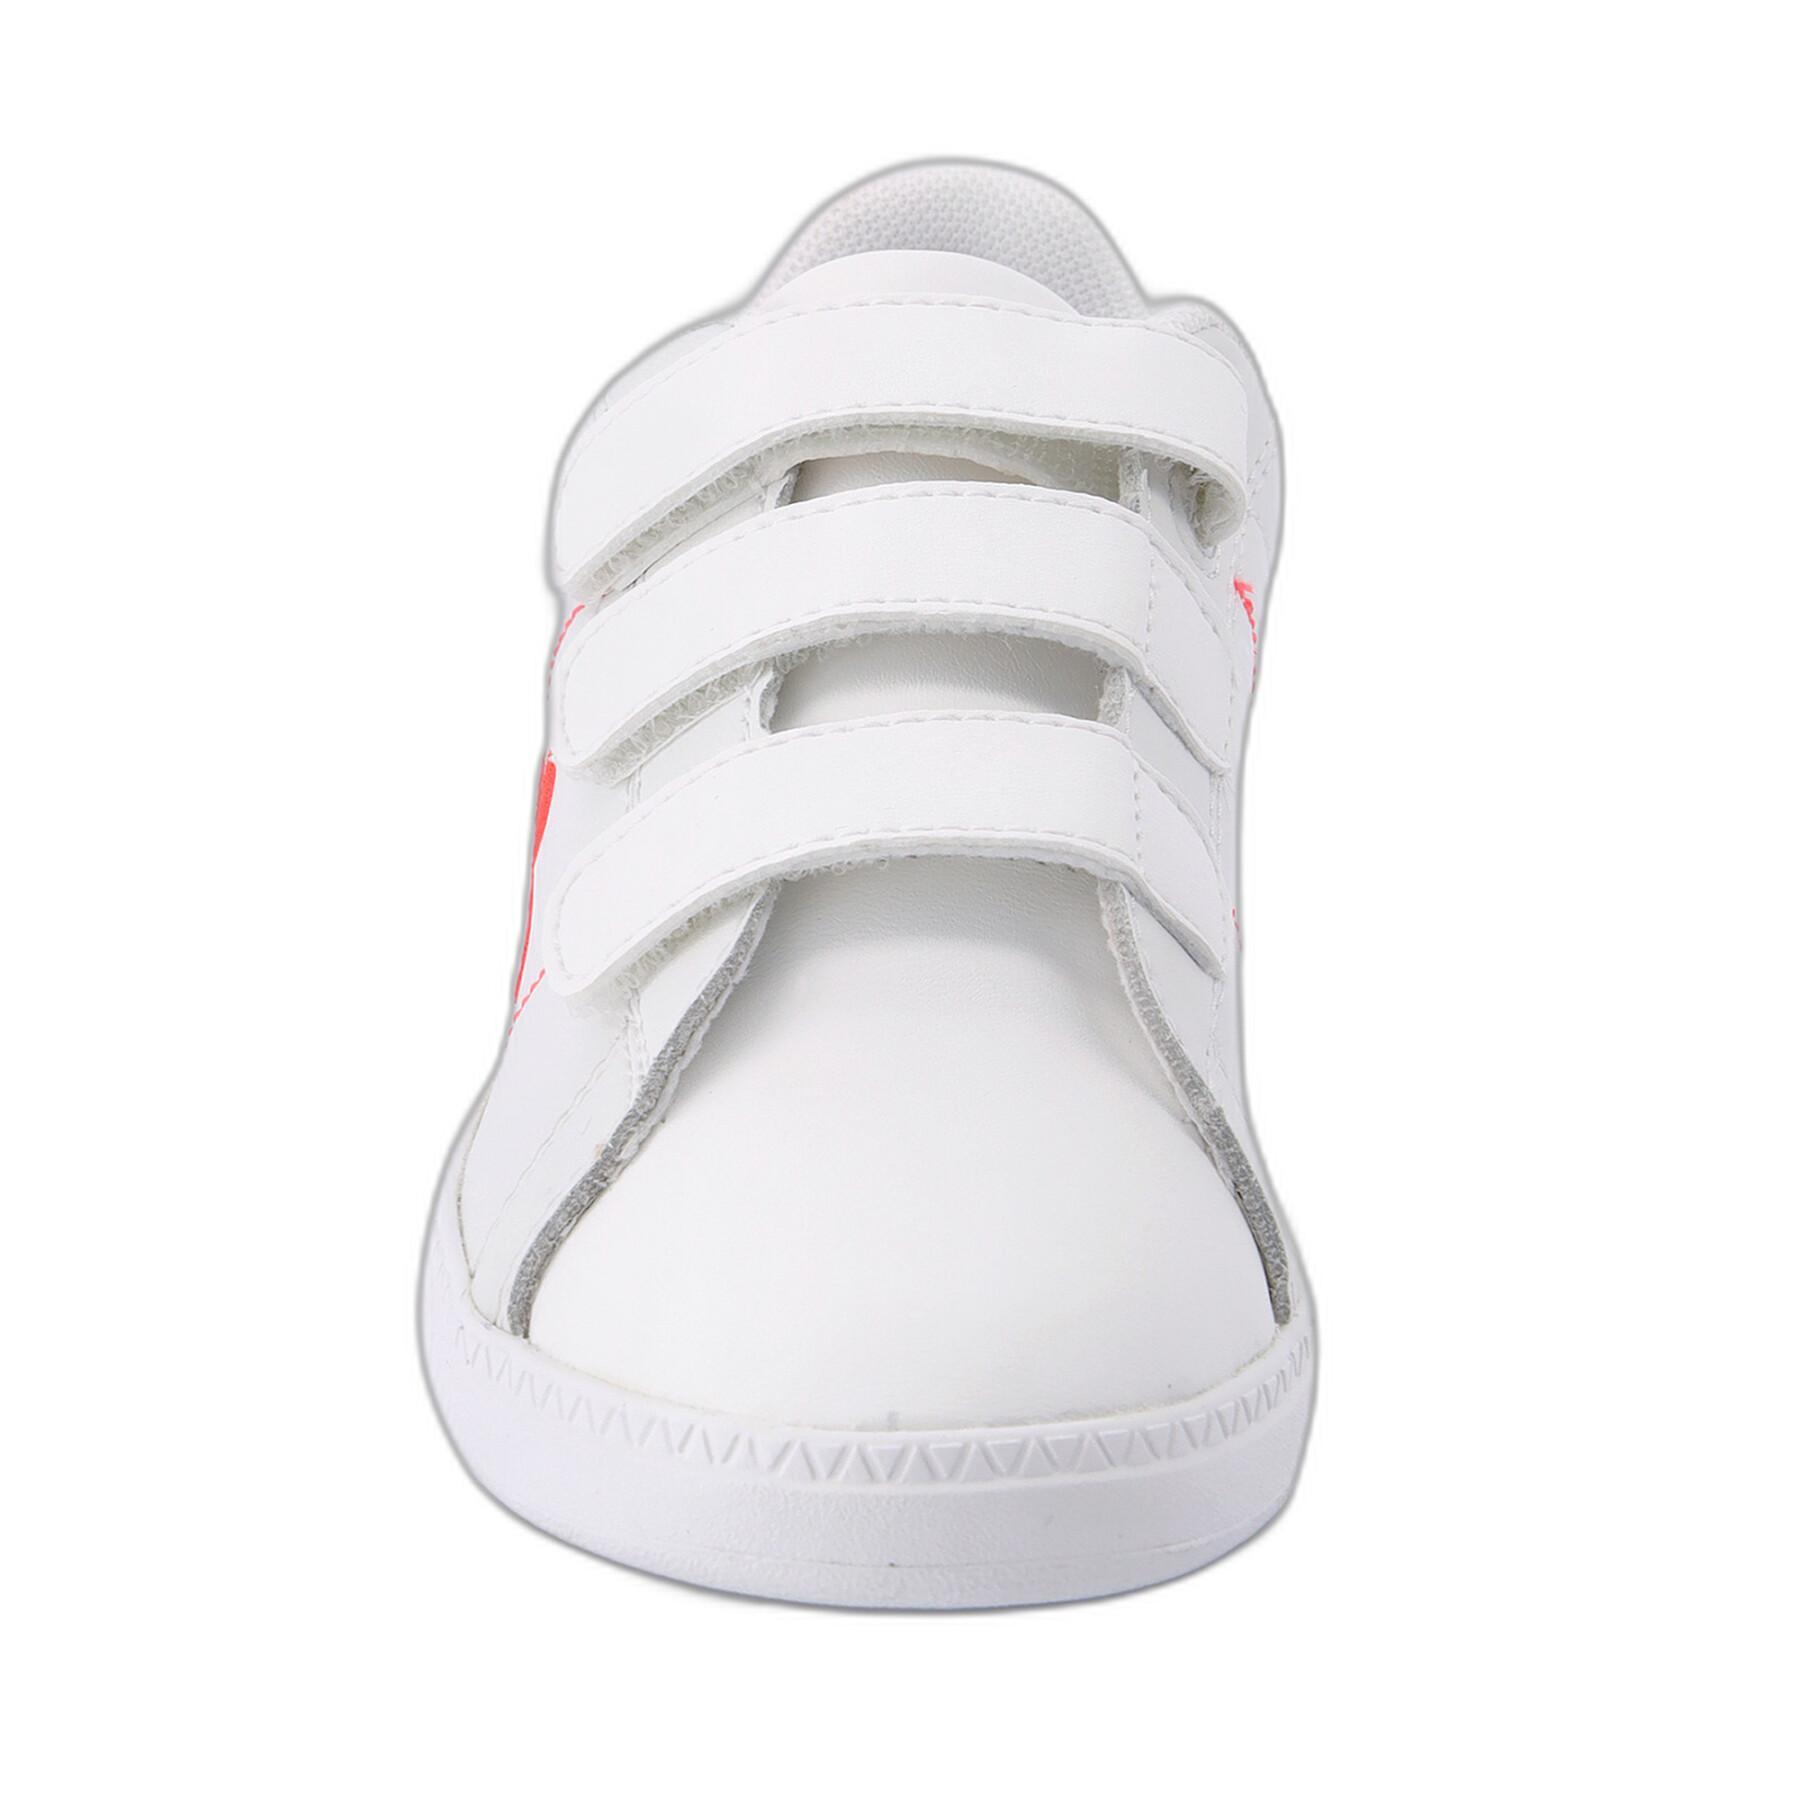 Girl sneakers Le Coq Sportif Courtclassic PS Fluo